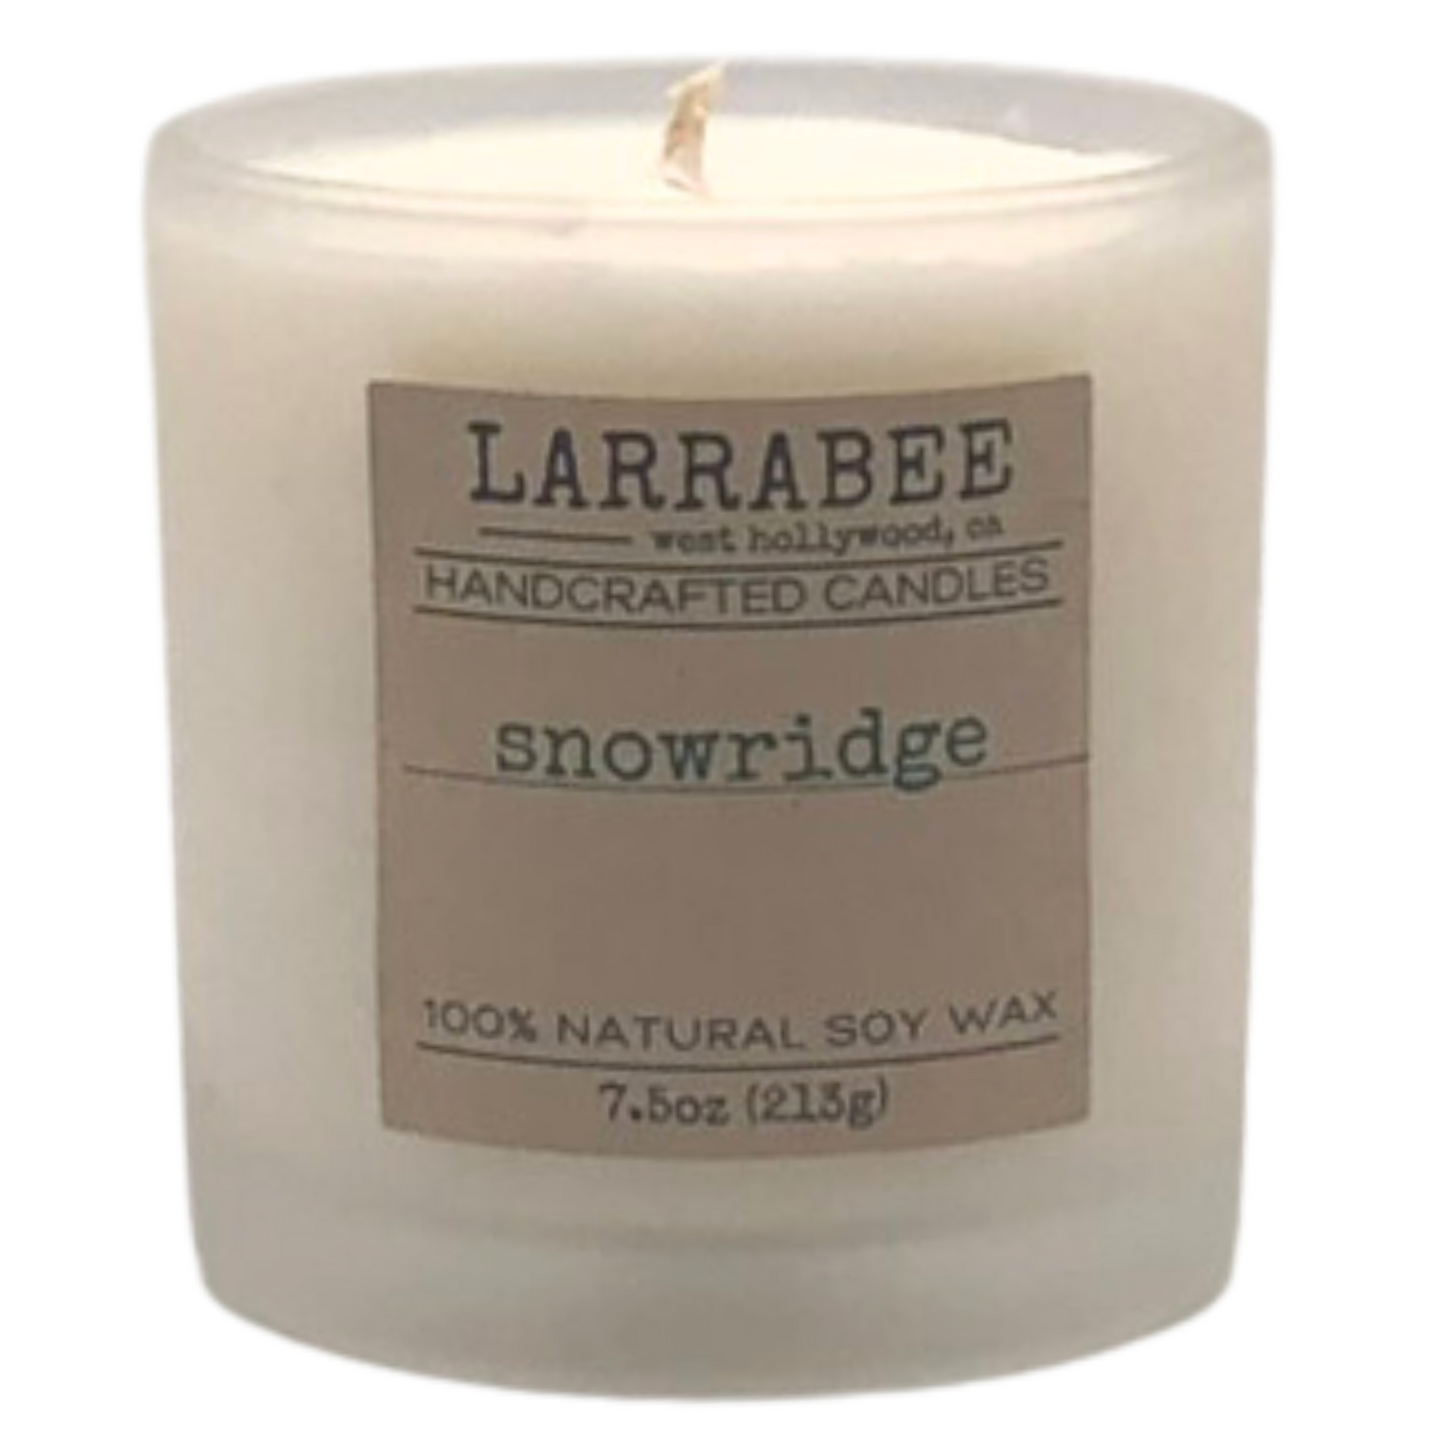 Snowridge handcrafted candle